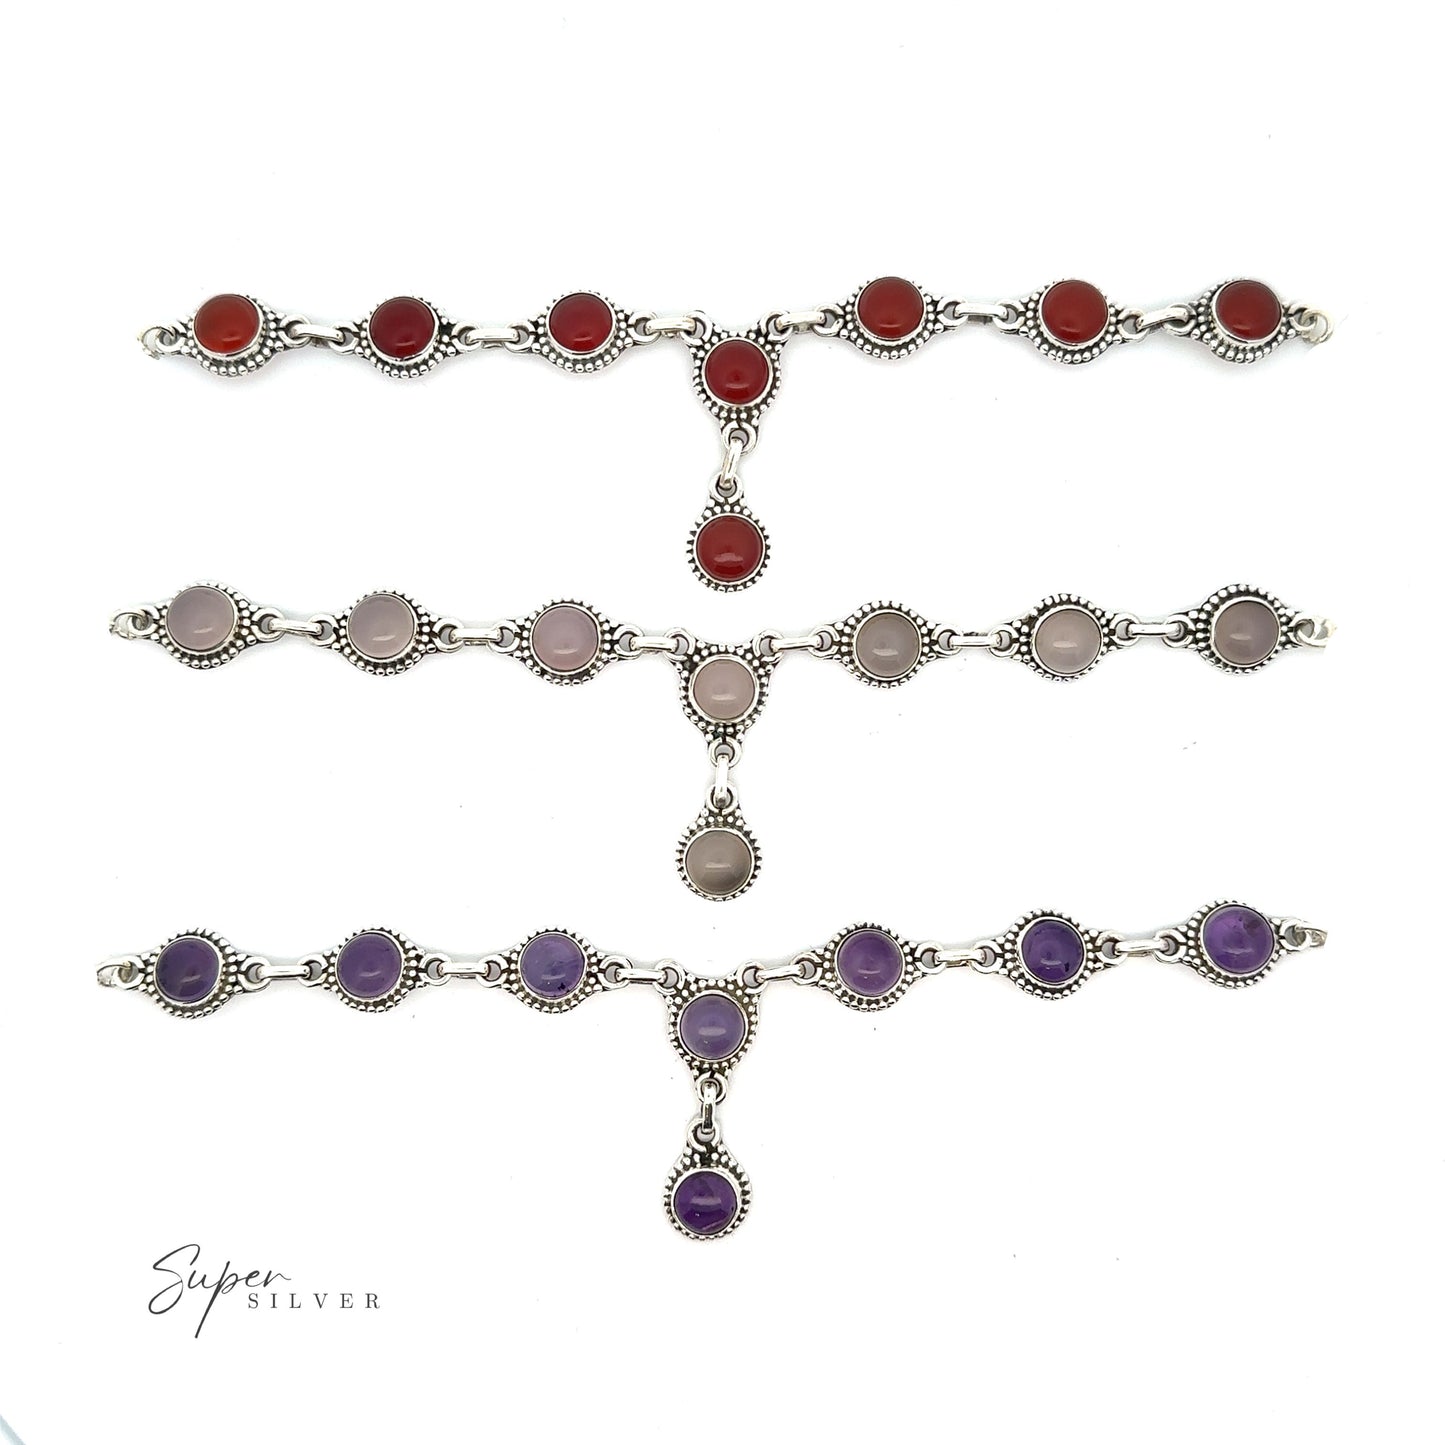 Three silver bracelets with round, colored stones in red, gray, and purple are laid out horizontally on a white background. The logo "Super Silver" is visible in the bottom left corner. This bohemian style jewelry complements any Round Gemstone Y Necklace with Ball Border for a chic look.